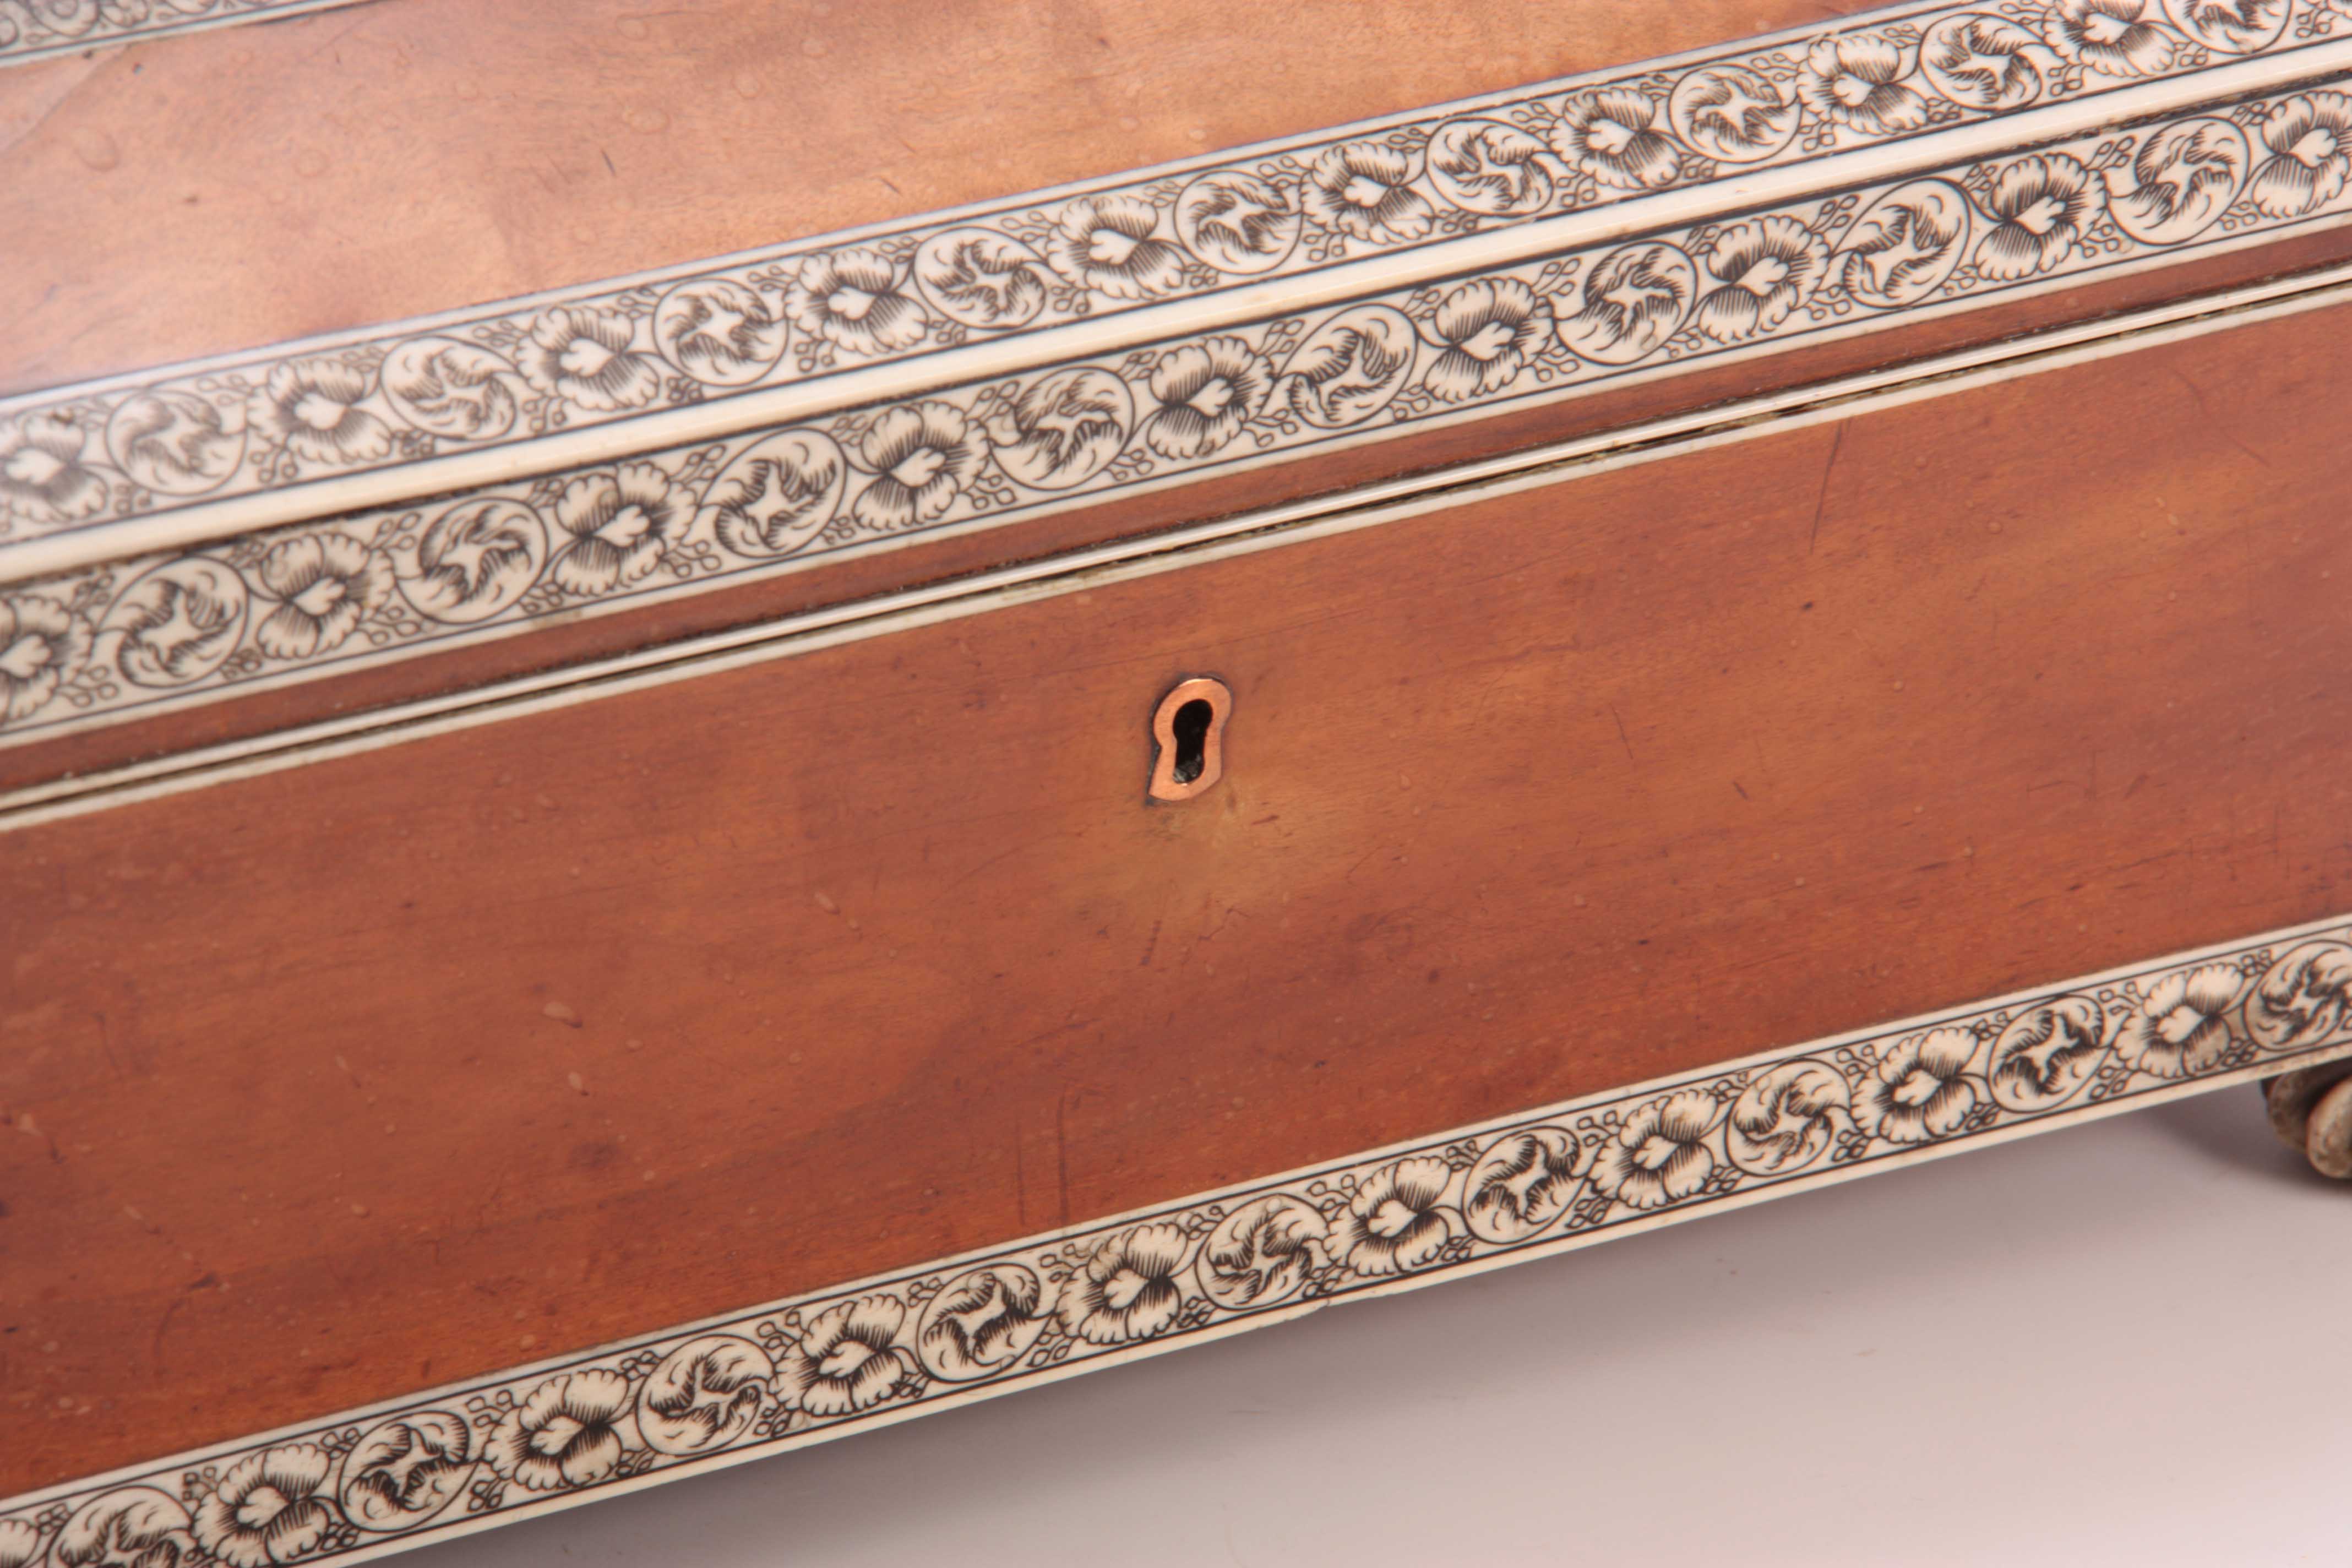 A FINE 19TH CENTURY VIZAGAPATAM ANGLO INDIAN IVORY AND SANDALWOOD JEWELLERY CASKET with gadrooned - Image 2 of 6